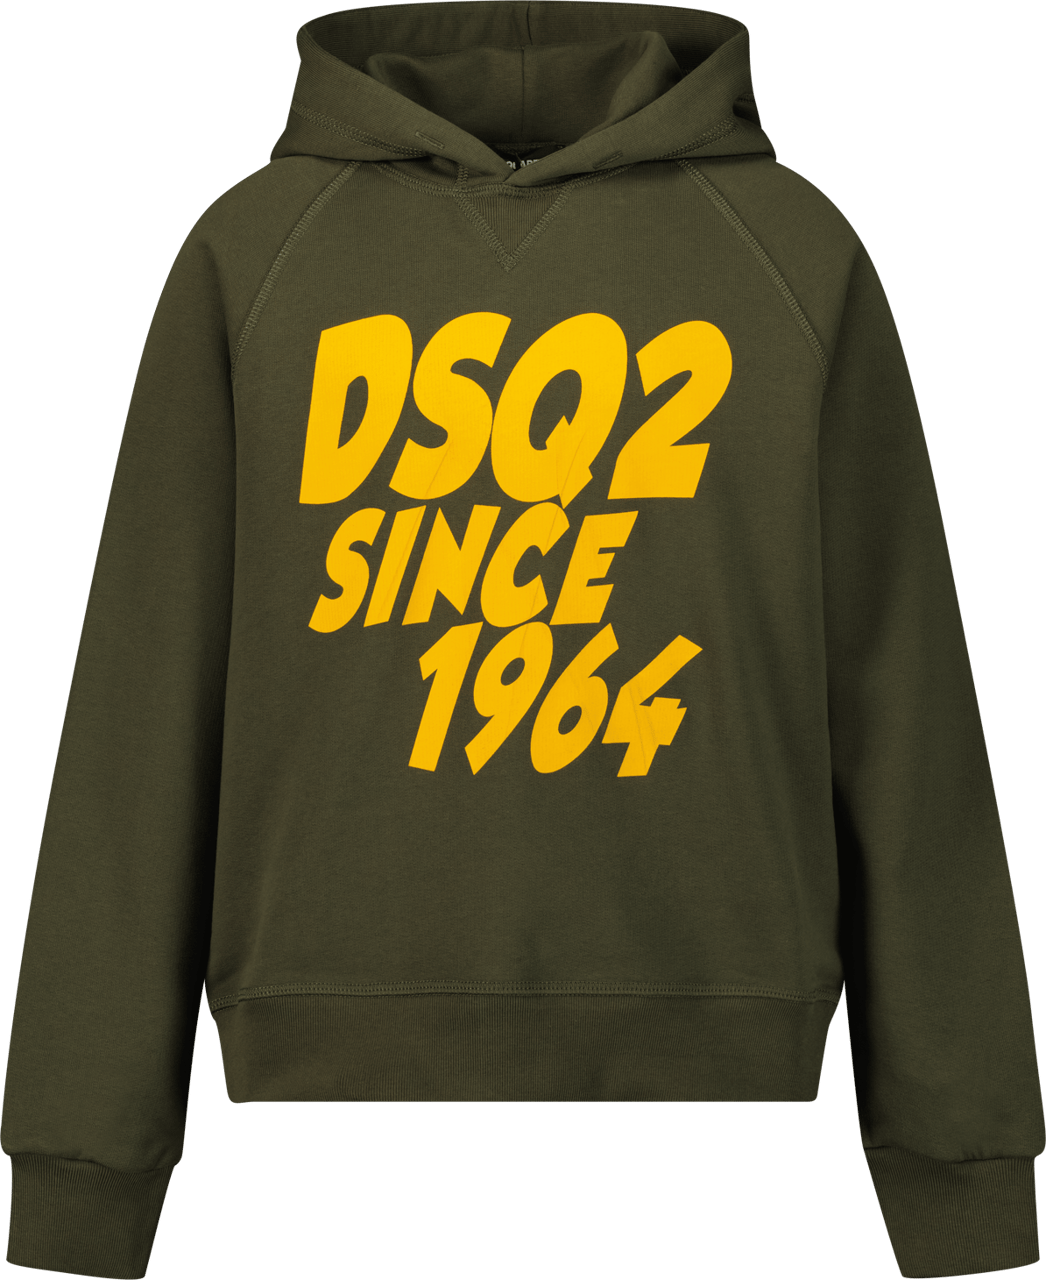 Dsquared2 Dsquared2 Kinder Unisex Trui Army Groen